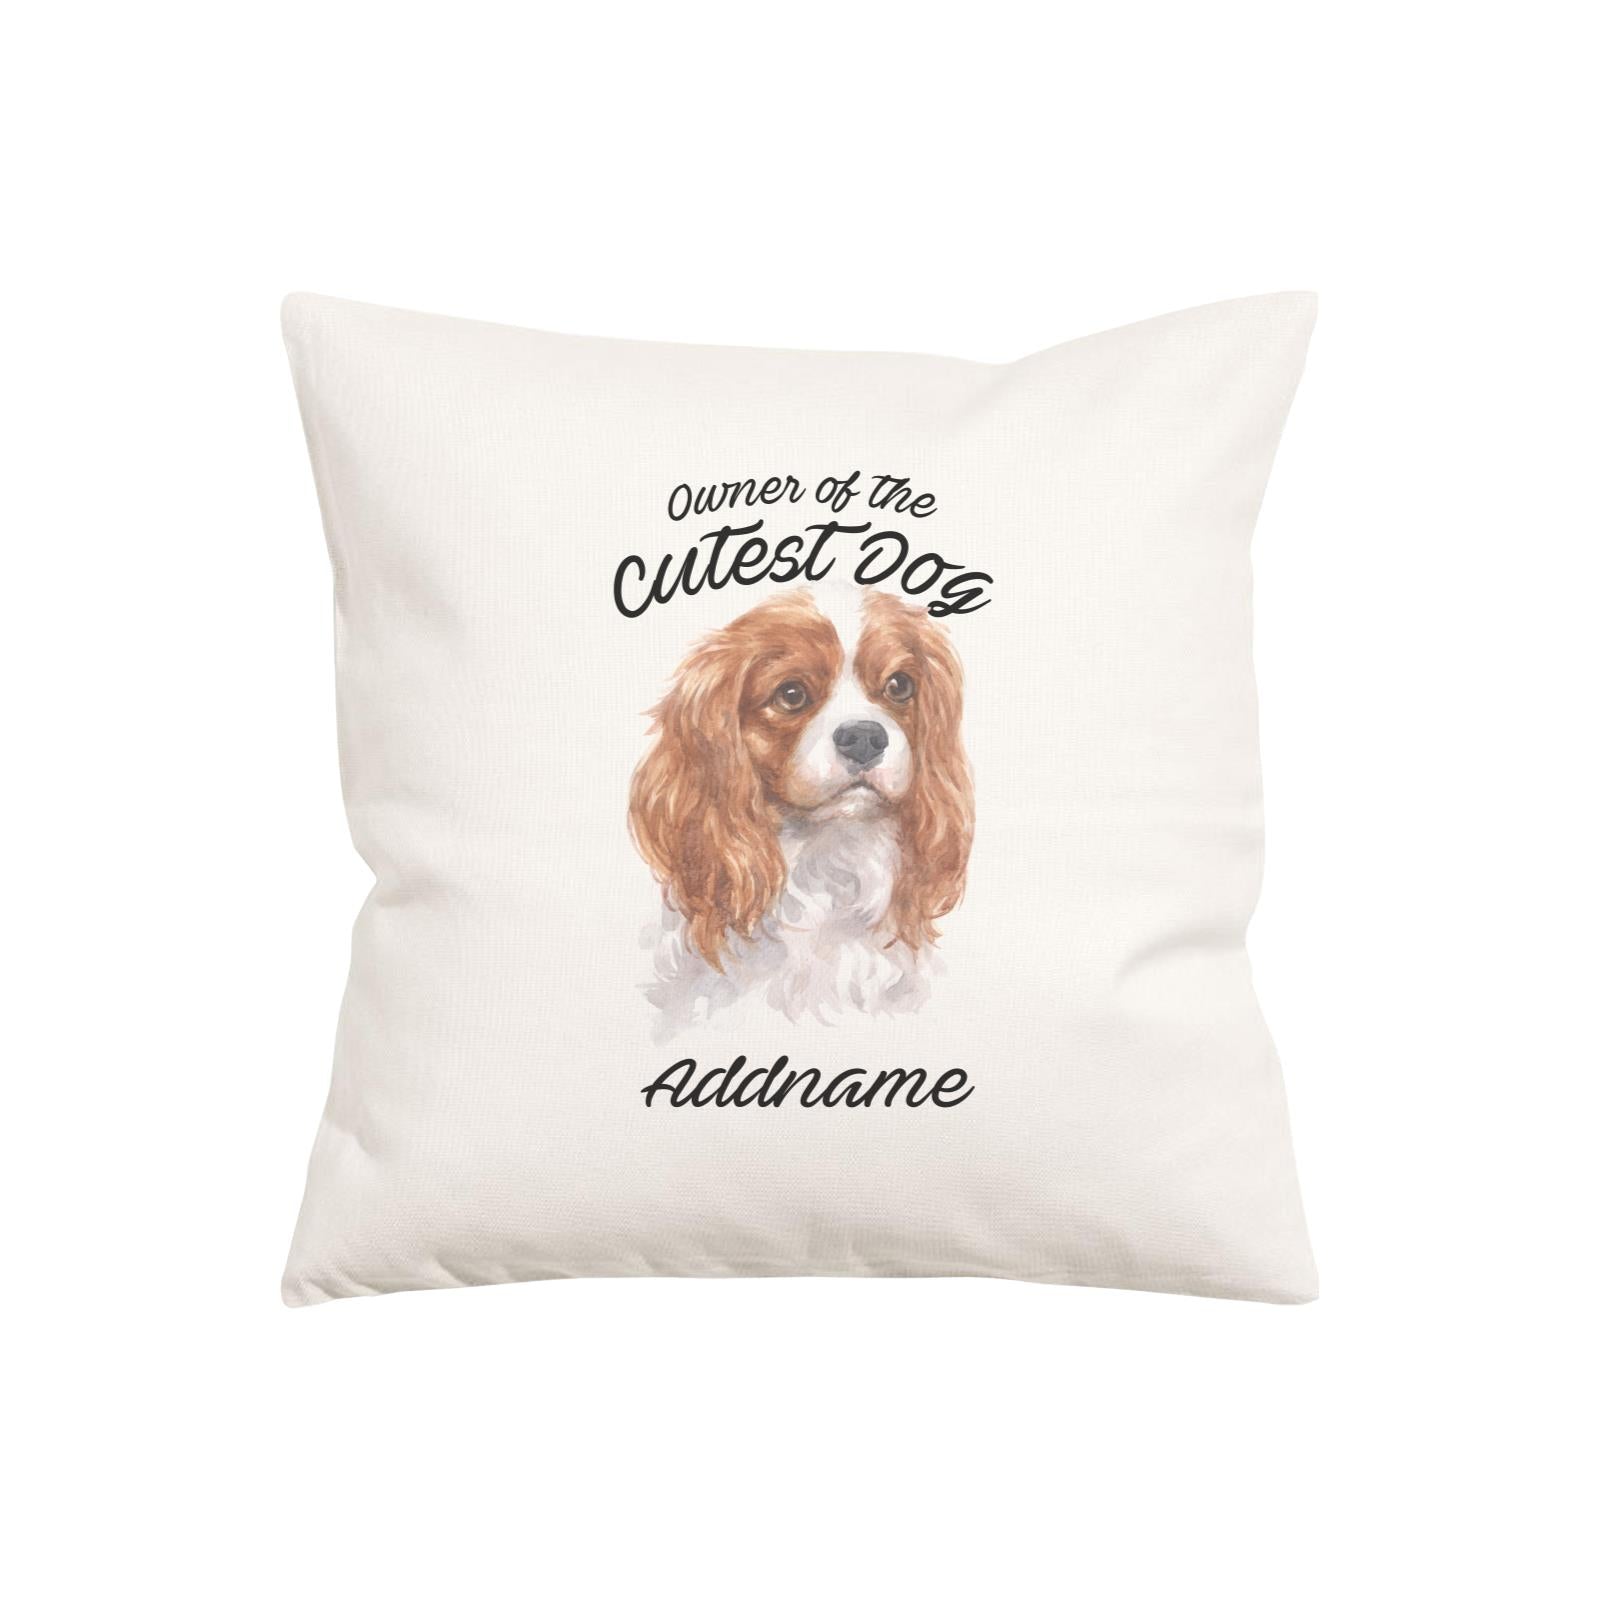 Watercolor Dog Owner Of The Cutest Dog King Charles Spaniel Addname Pillow Cushion